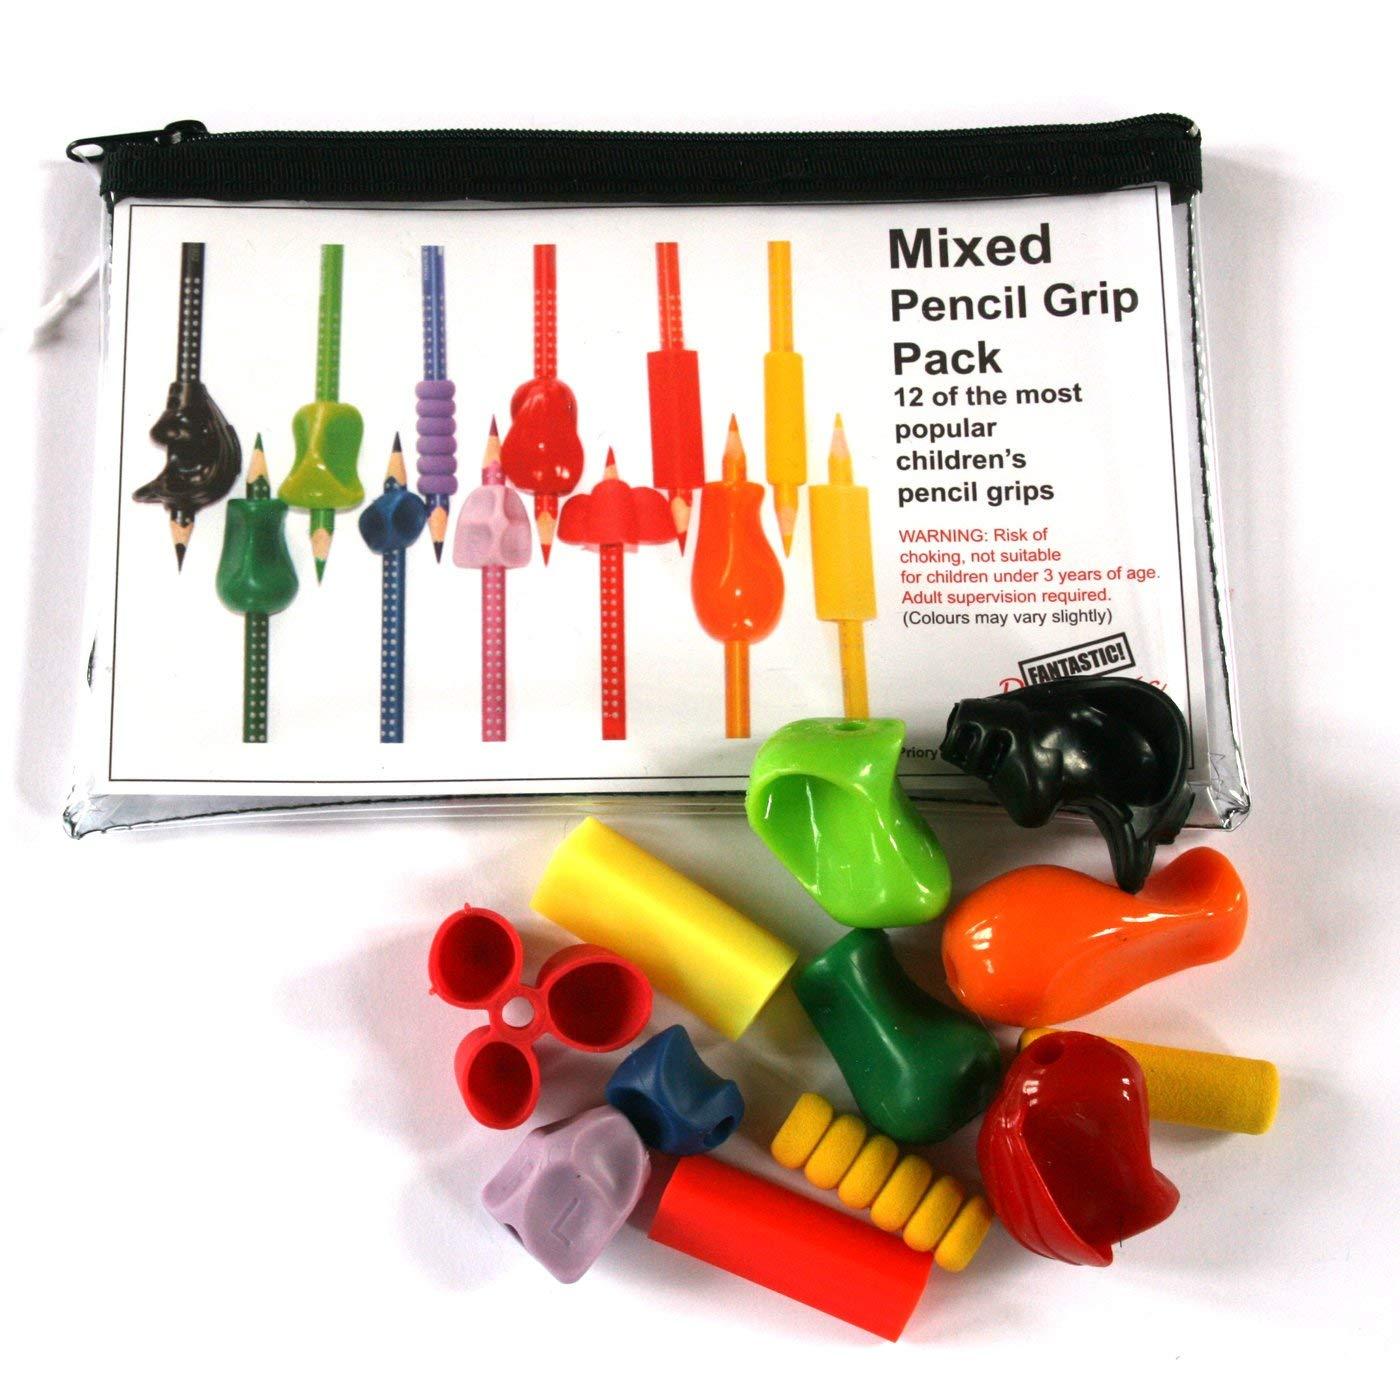 Product 12 Pack Mixed pencil grip pack,Pencil Grip Kit Pack,Pencil Grip Pencil Grip Selection Box,Special needs pencil grips,pencil grippers,special needs pencil toppers,pencil toppers,special needs pencil writing grips - Sensory Education image